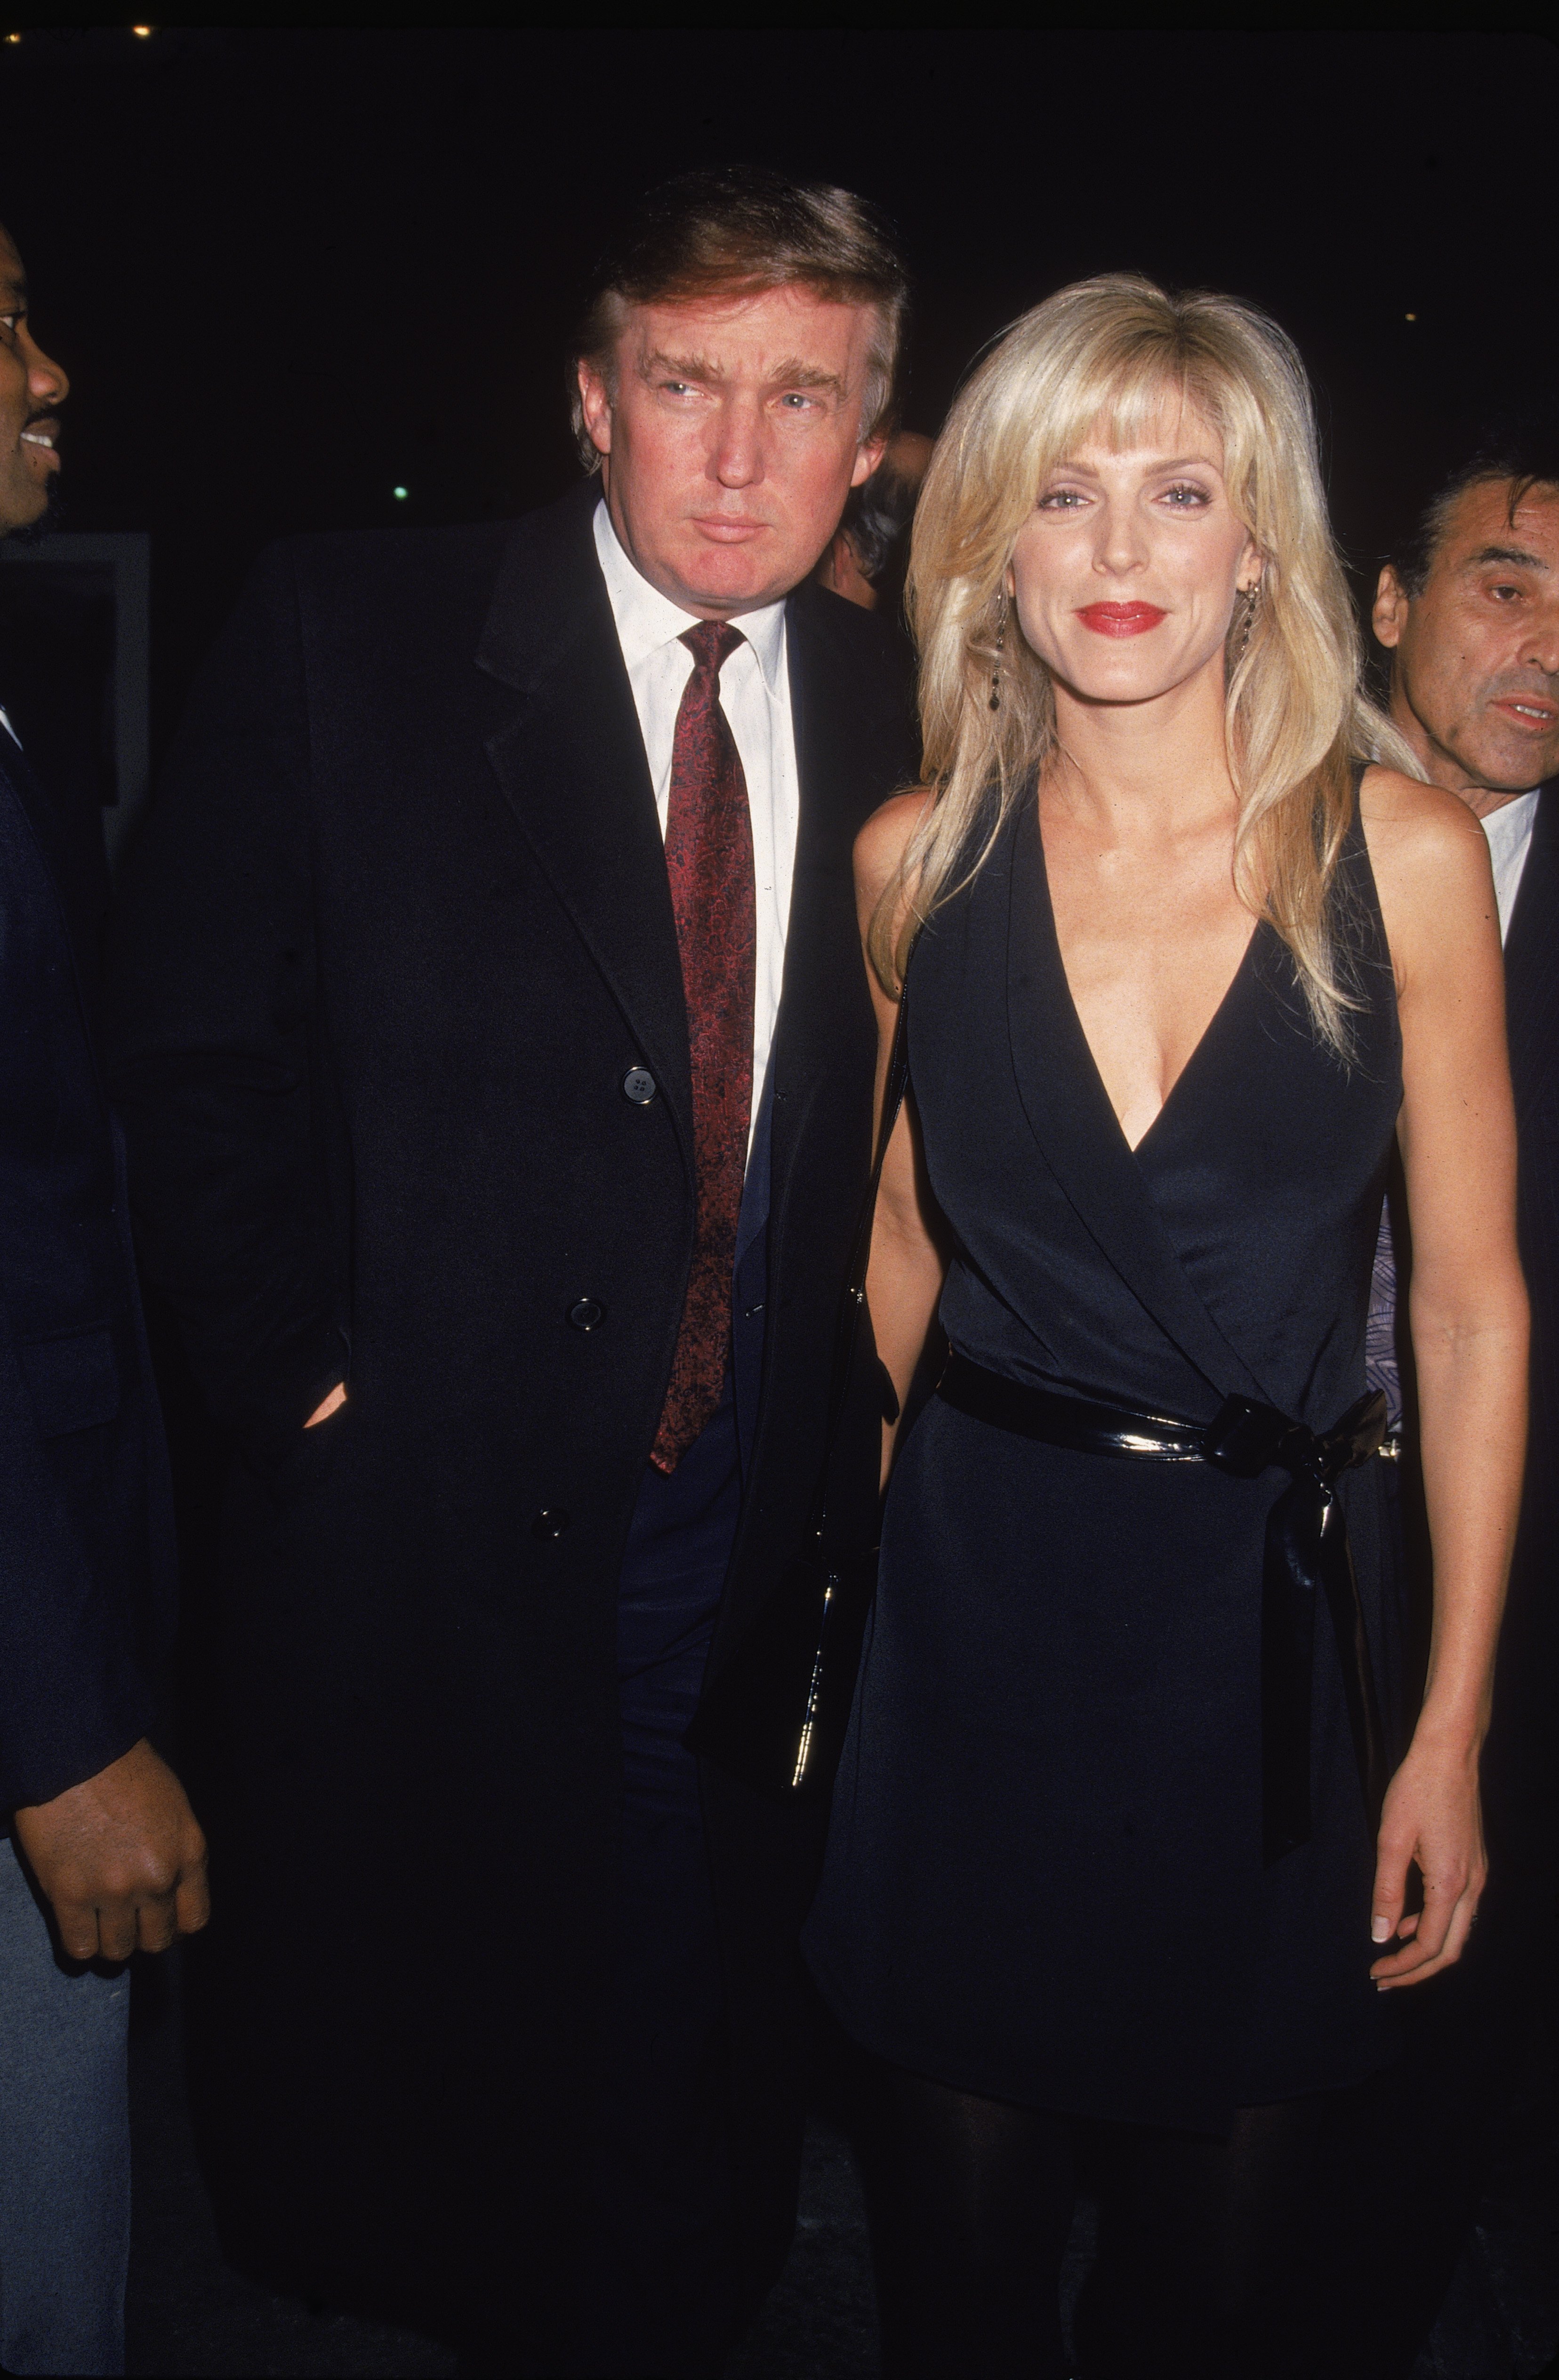 Donald Trump and Marla Maples attend the premiere of the film 'Nell' in New York City on May 1994. | Source: Getty Images